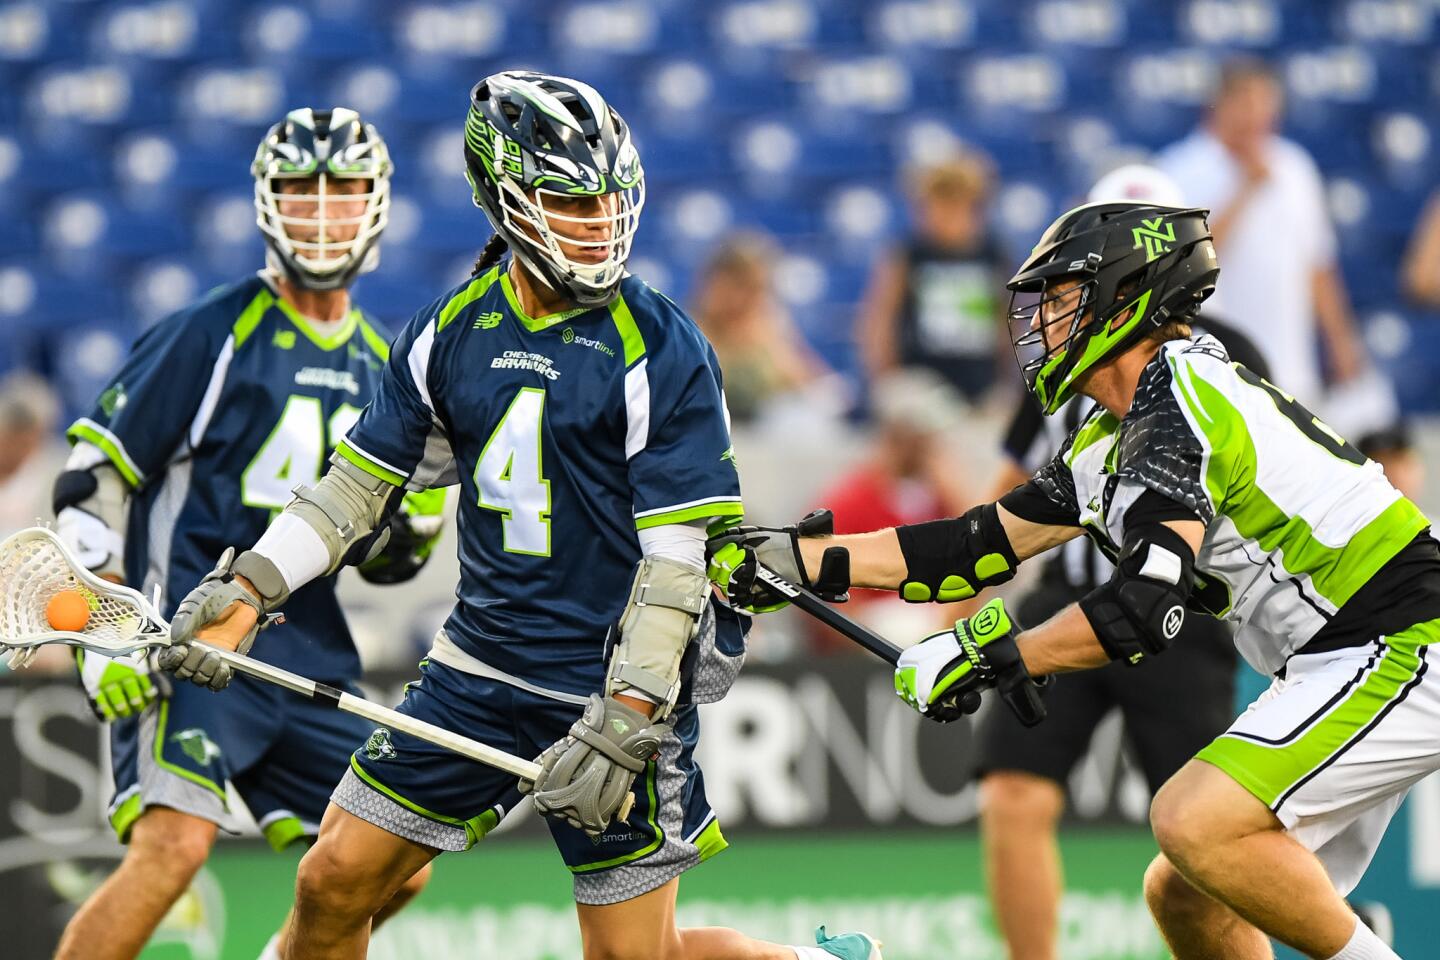 Chesapeake Bayhawks attack Lyle Thompson (4)looks to pass against New York Lizards midfielder Mike Begley (63) during the first quarter at Navy-Marine Corps Memorial Stadium.